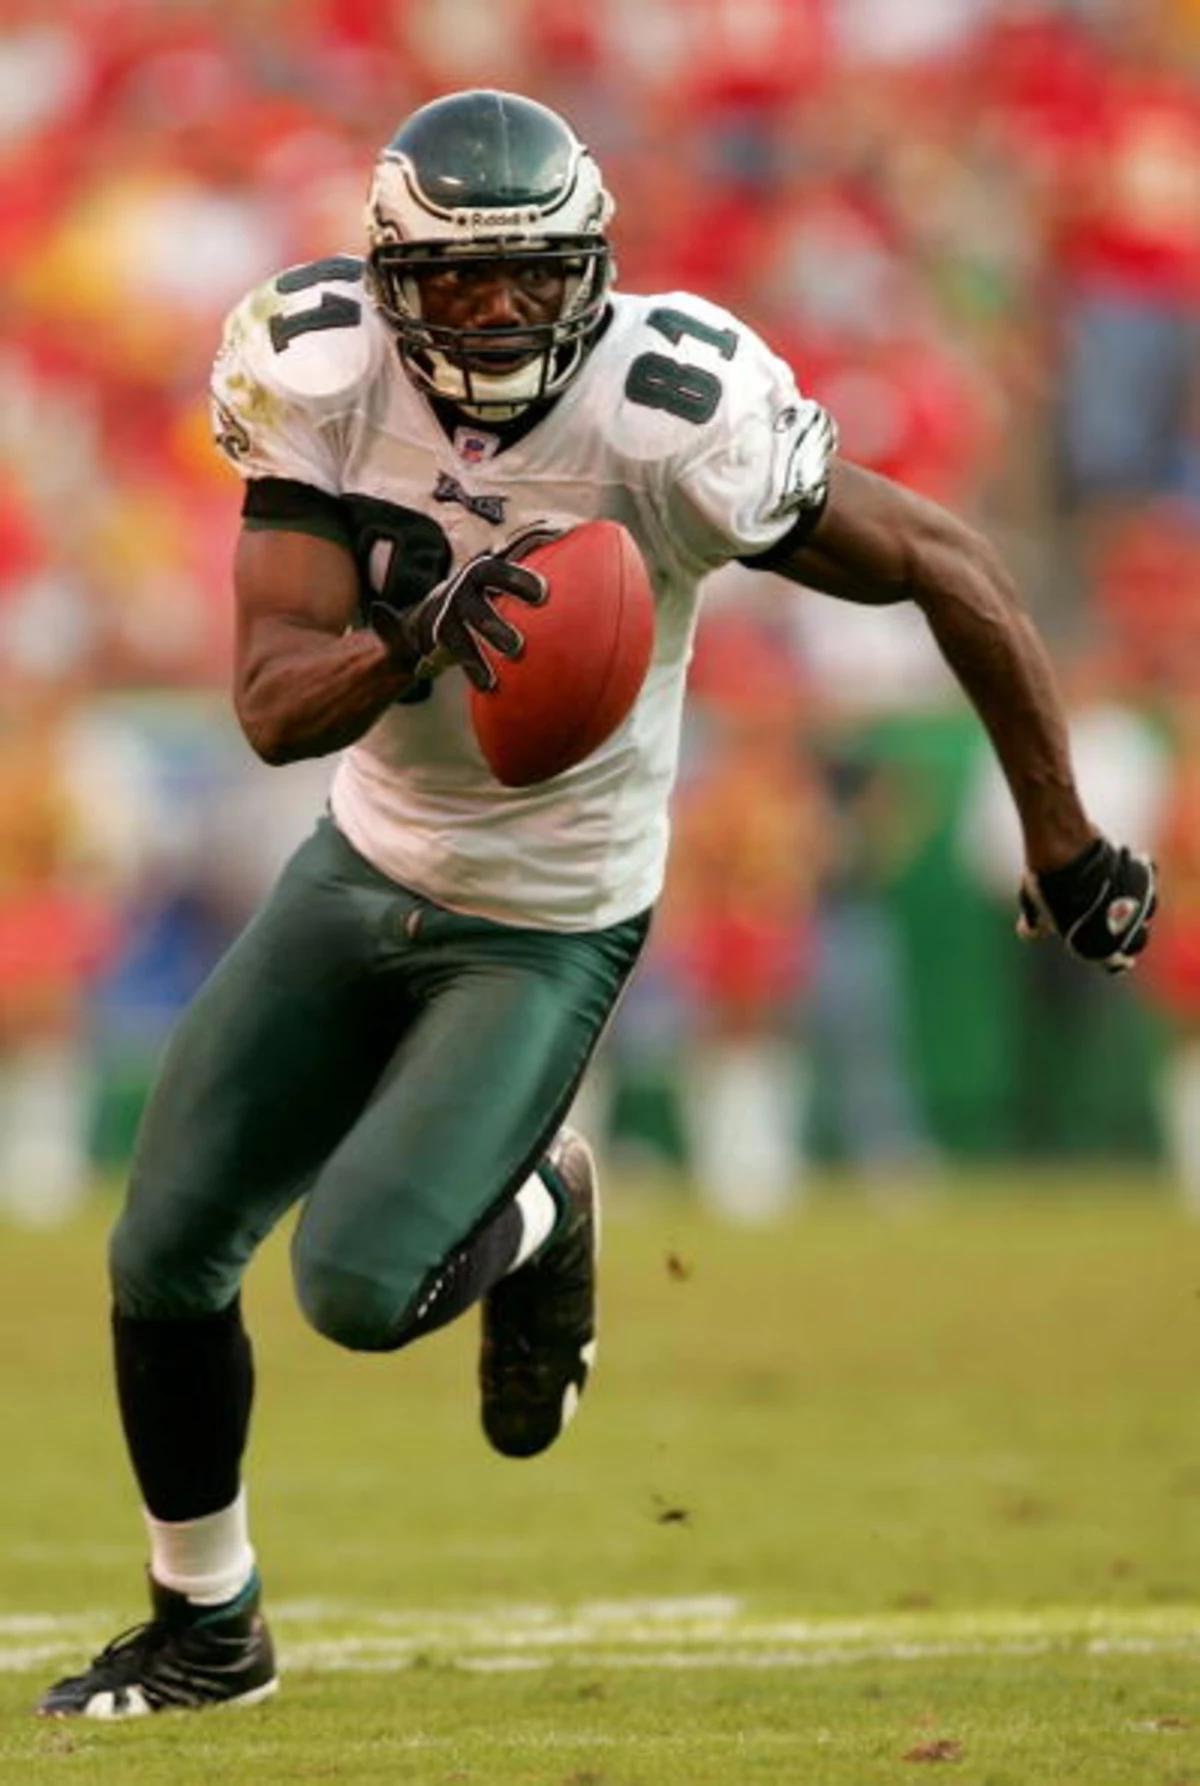 Where Did Terrell Owens Like Playing More? Philly or Dallas?